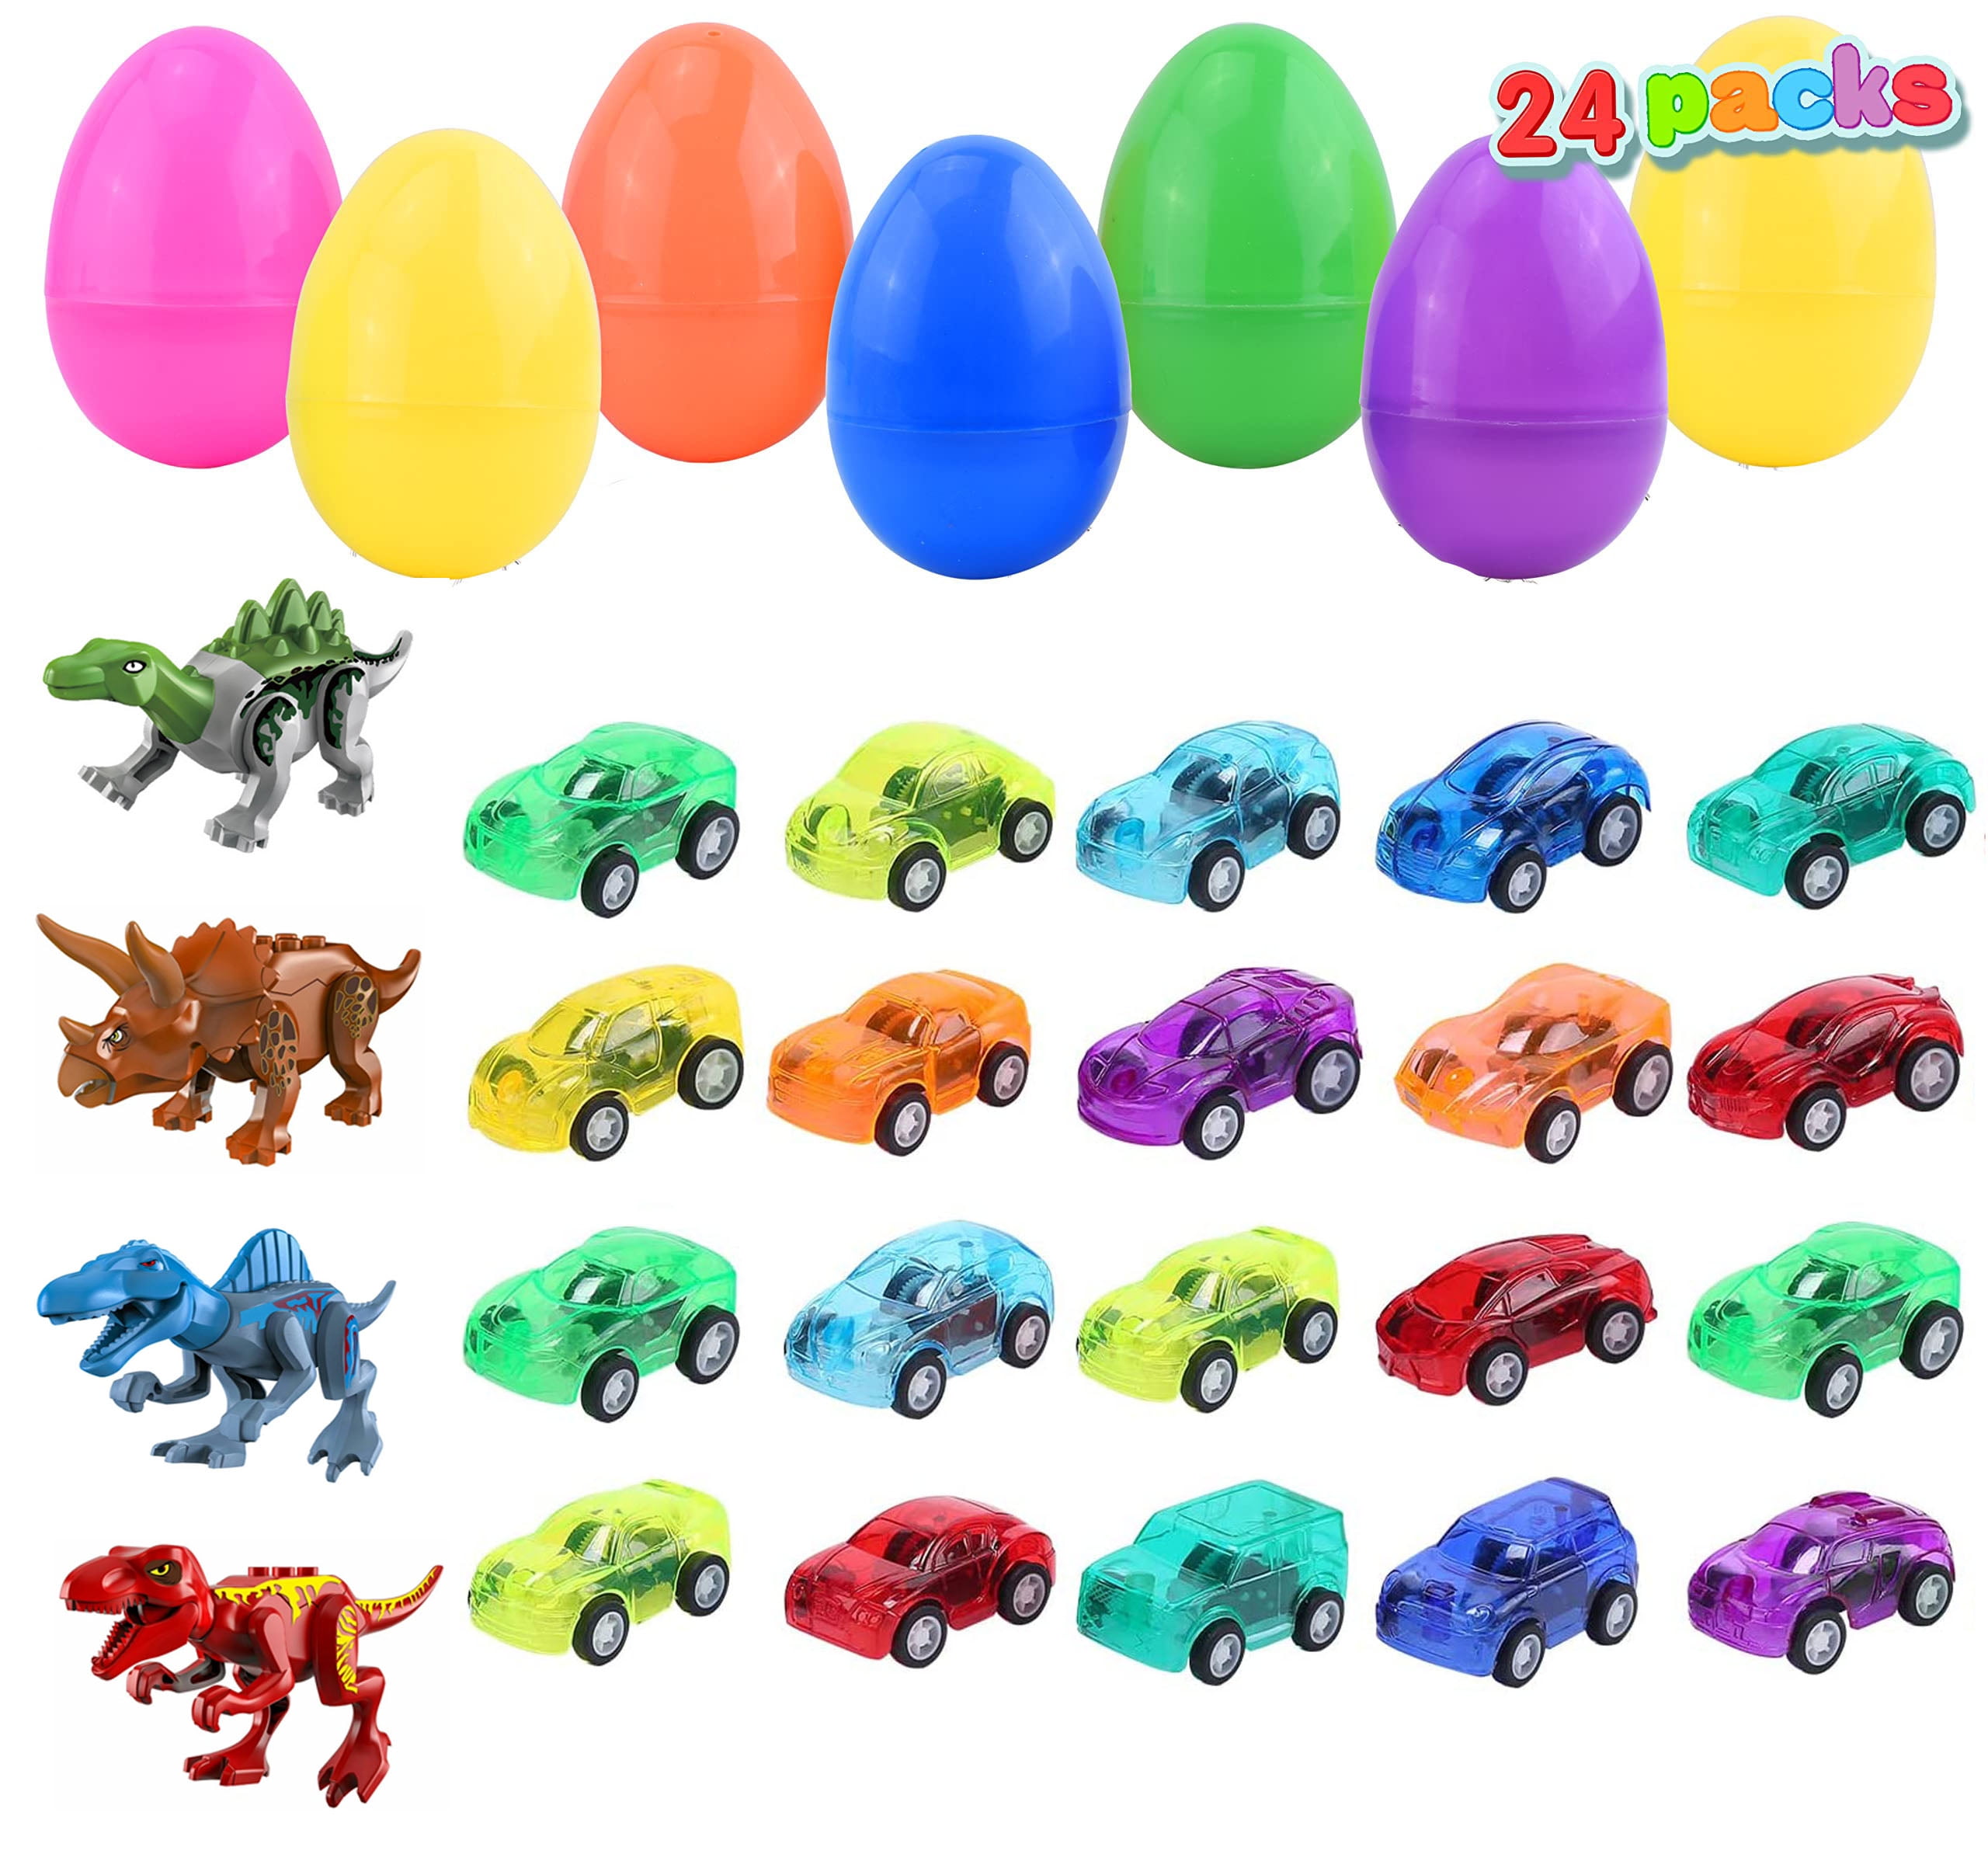 Dinosaur Teaching Set JOYIN 6 Pcs Dinosaur Toy Cars Party Favor Easter Stuffer Gifts Boys Girls Dino Toys 5'' Pull Back Car Toys for Kids and Toddlers Age 2,3,4,5 and Up with Learning Cards 